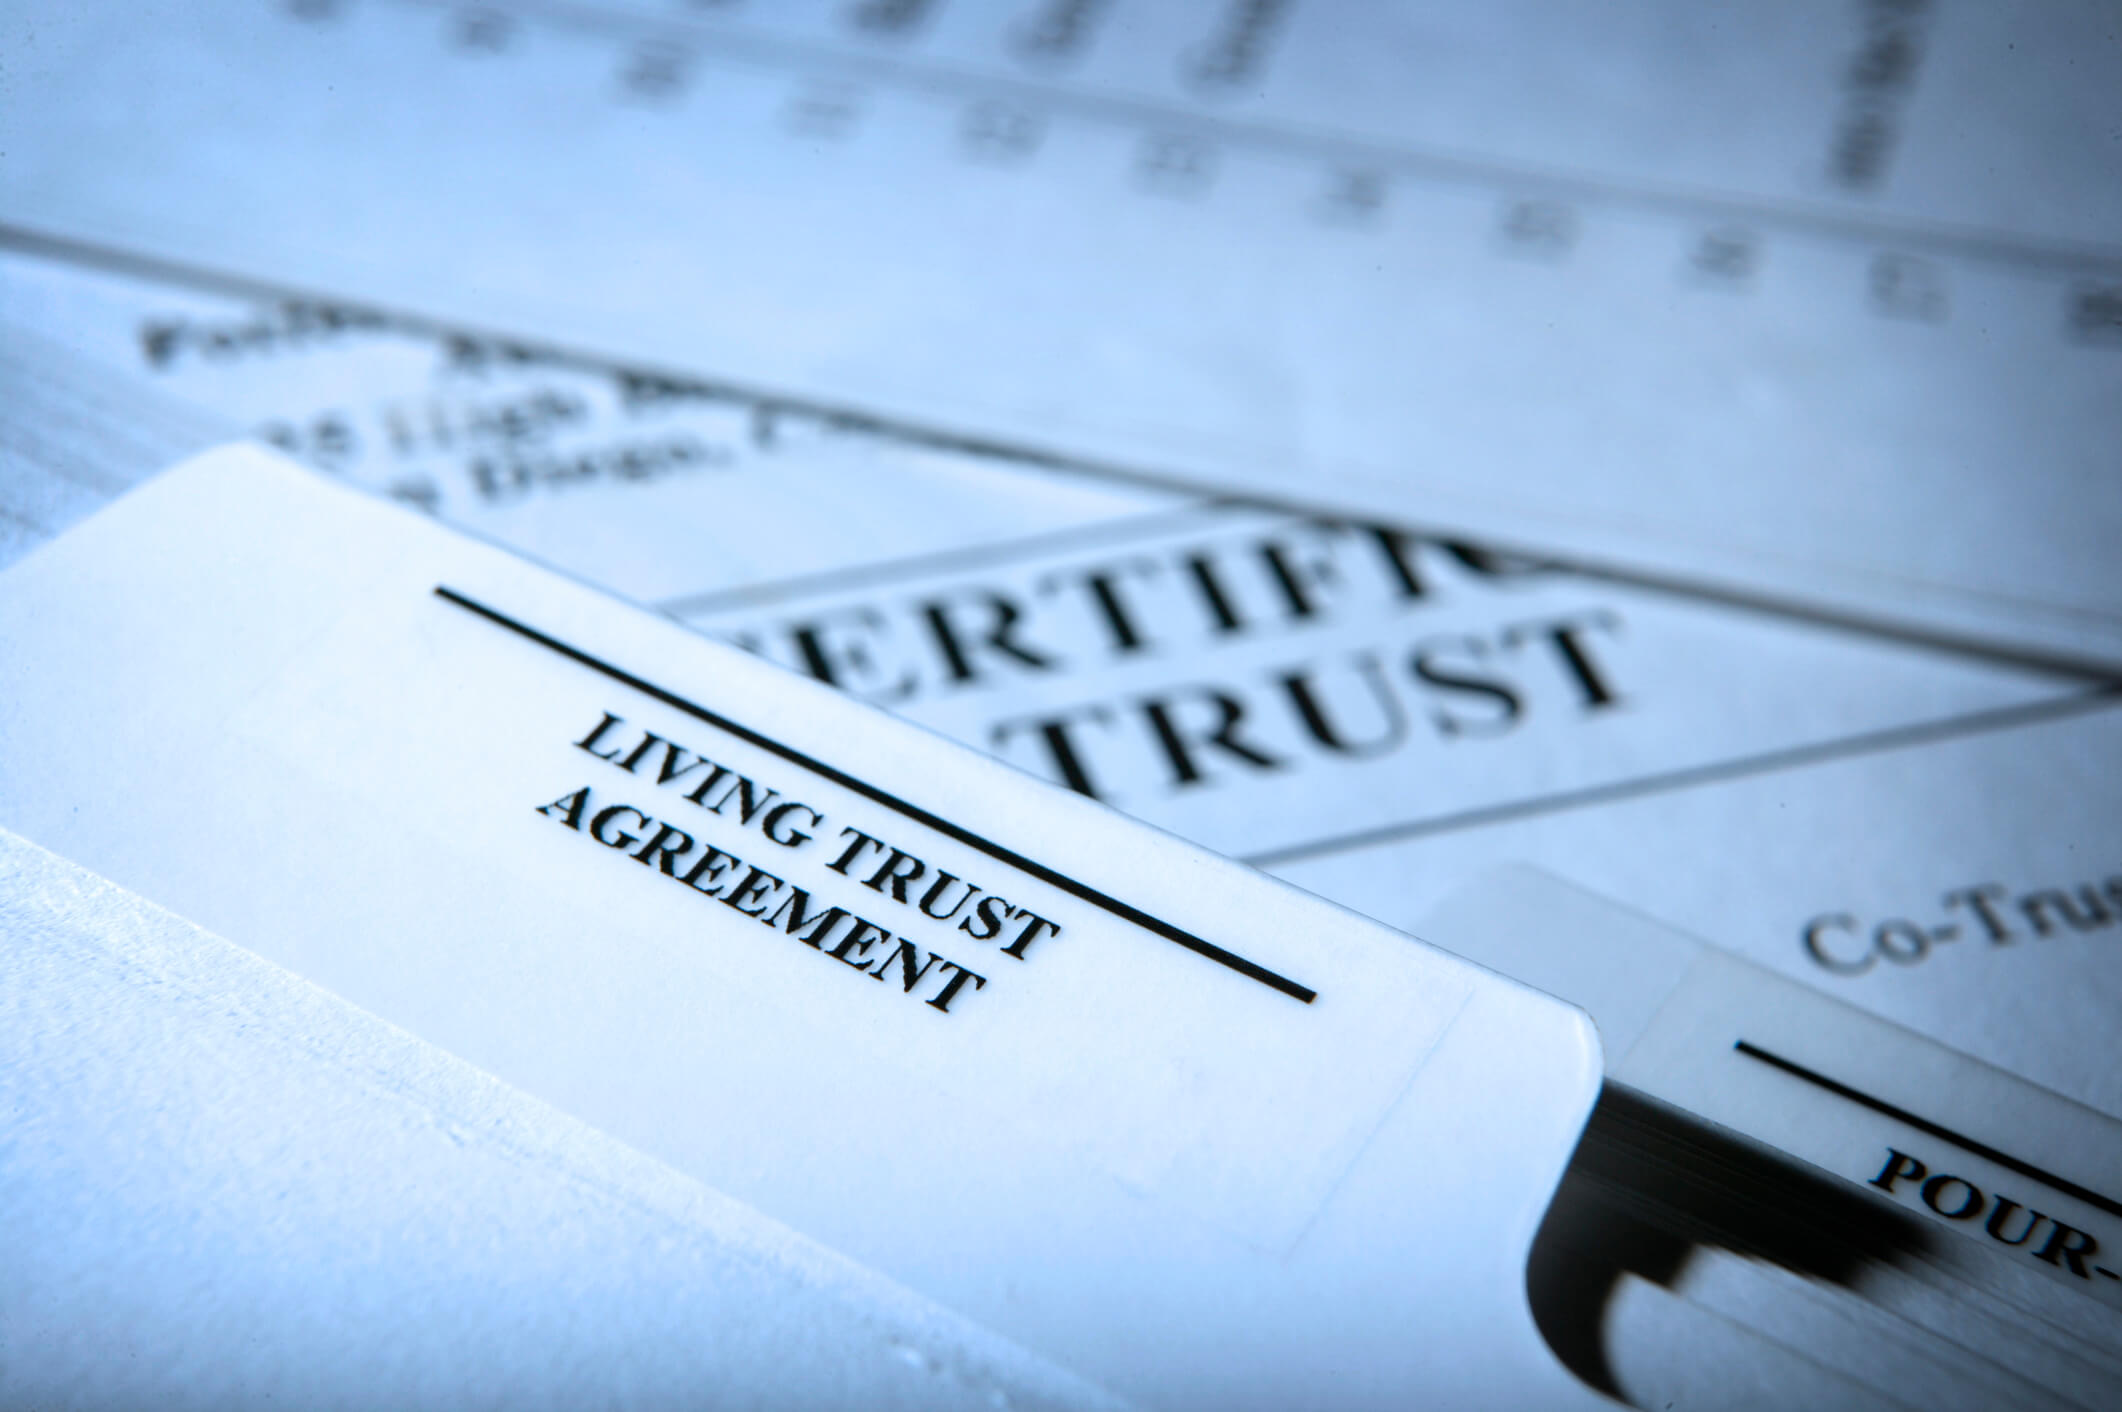 'Living Test Agreement' note Image